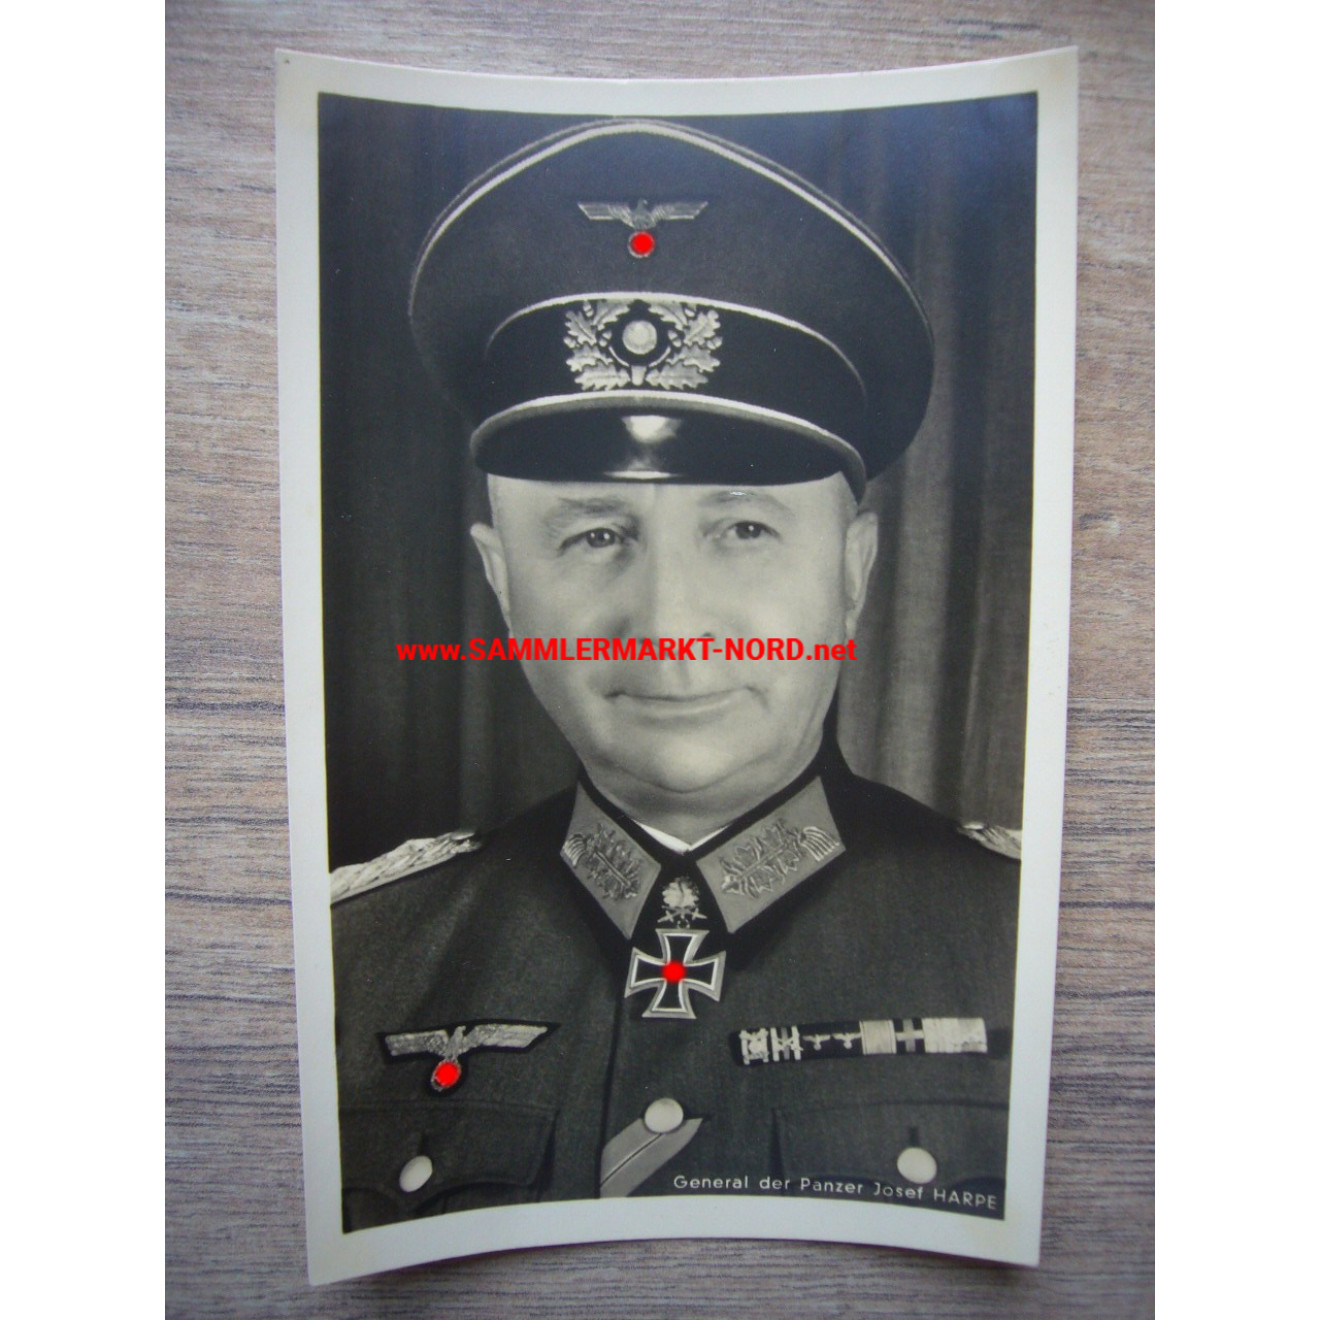 General of the Armoured Forces Josef Harpe - Hoffmann postcard